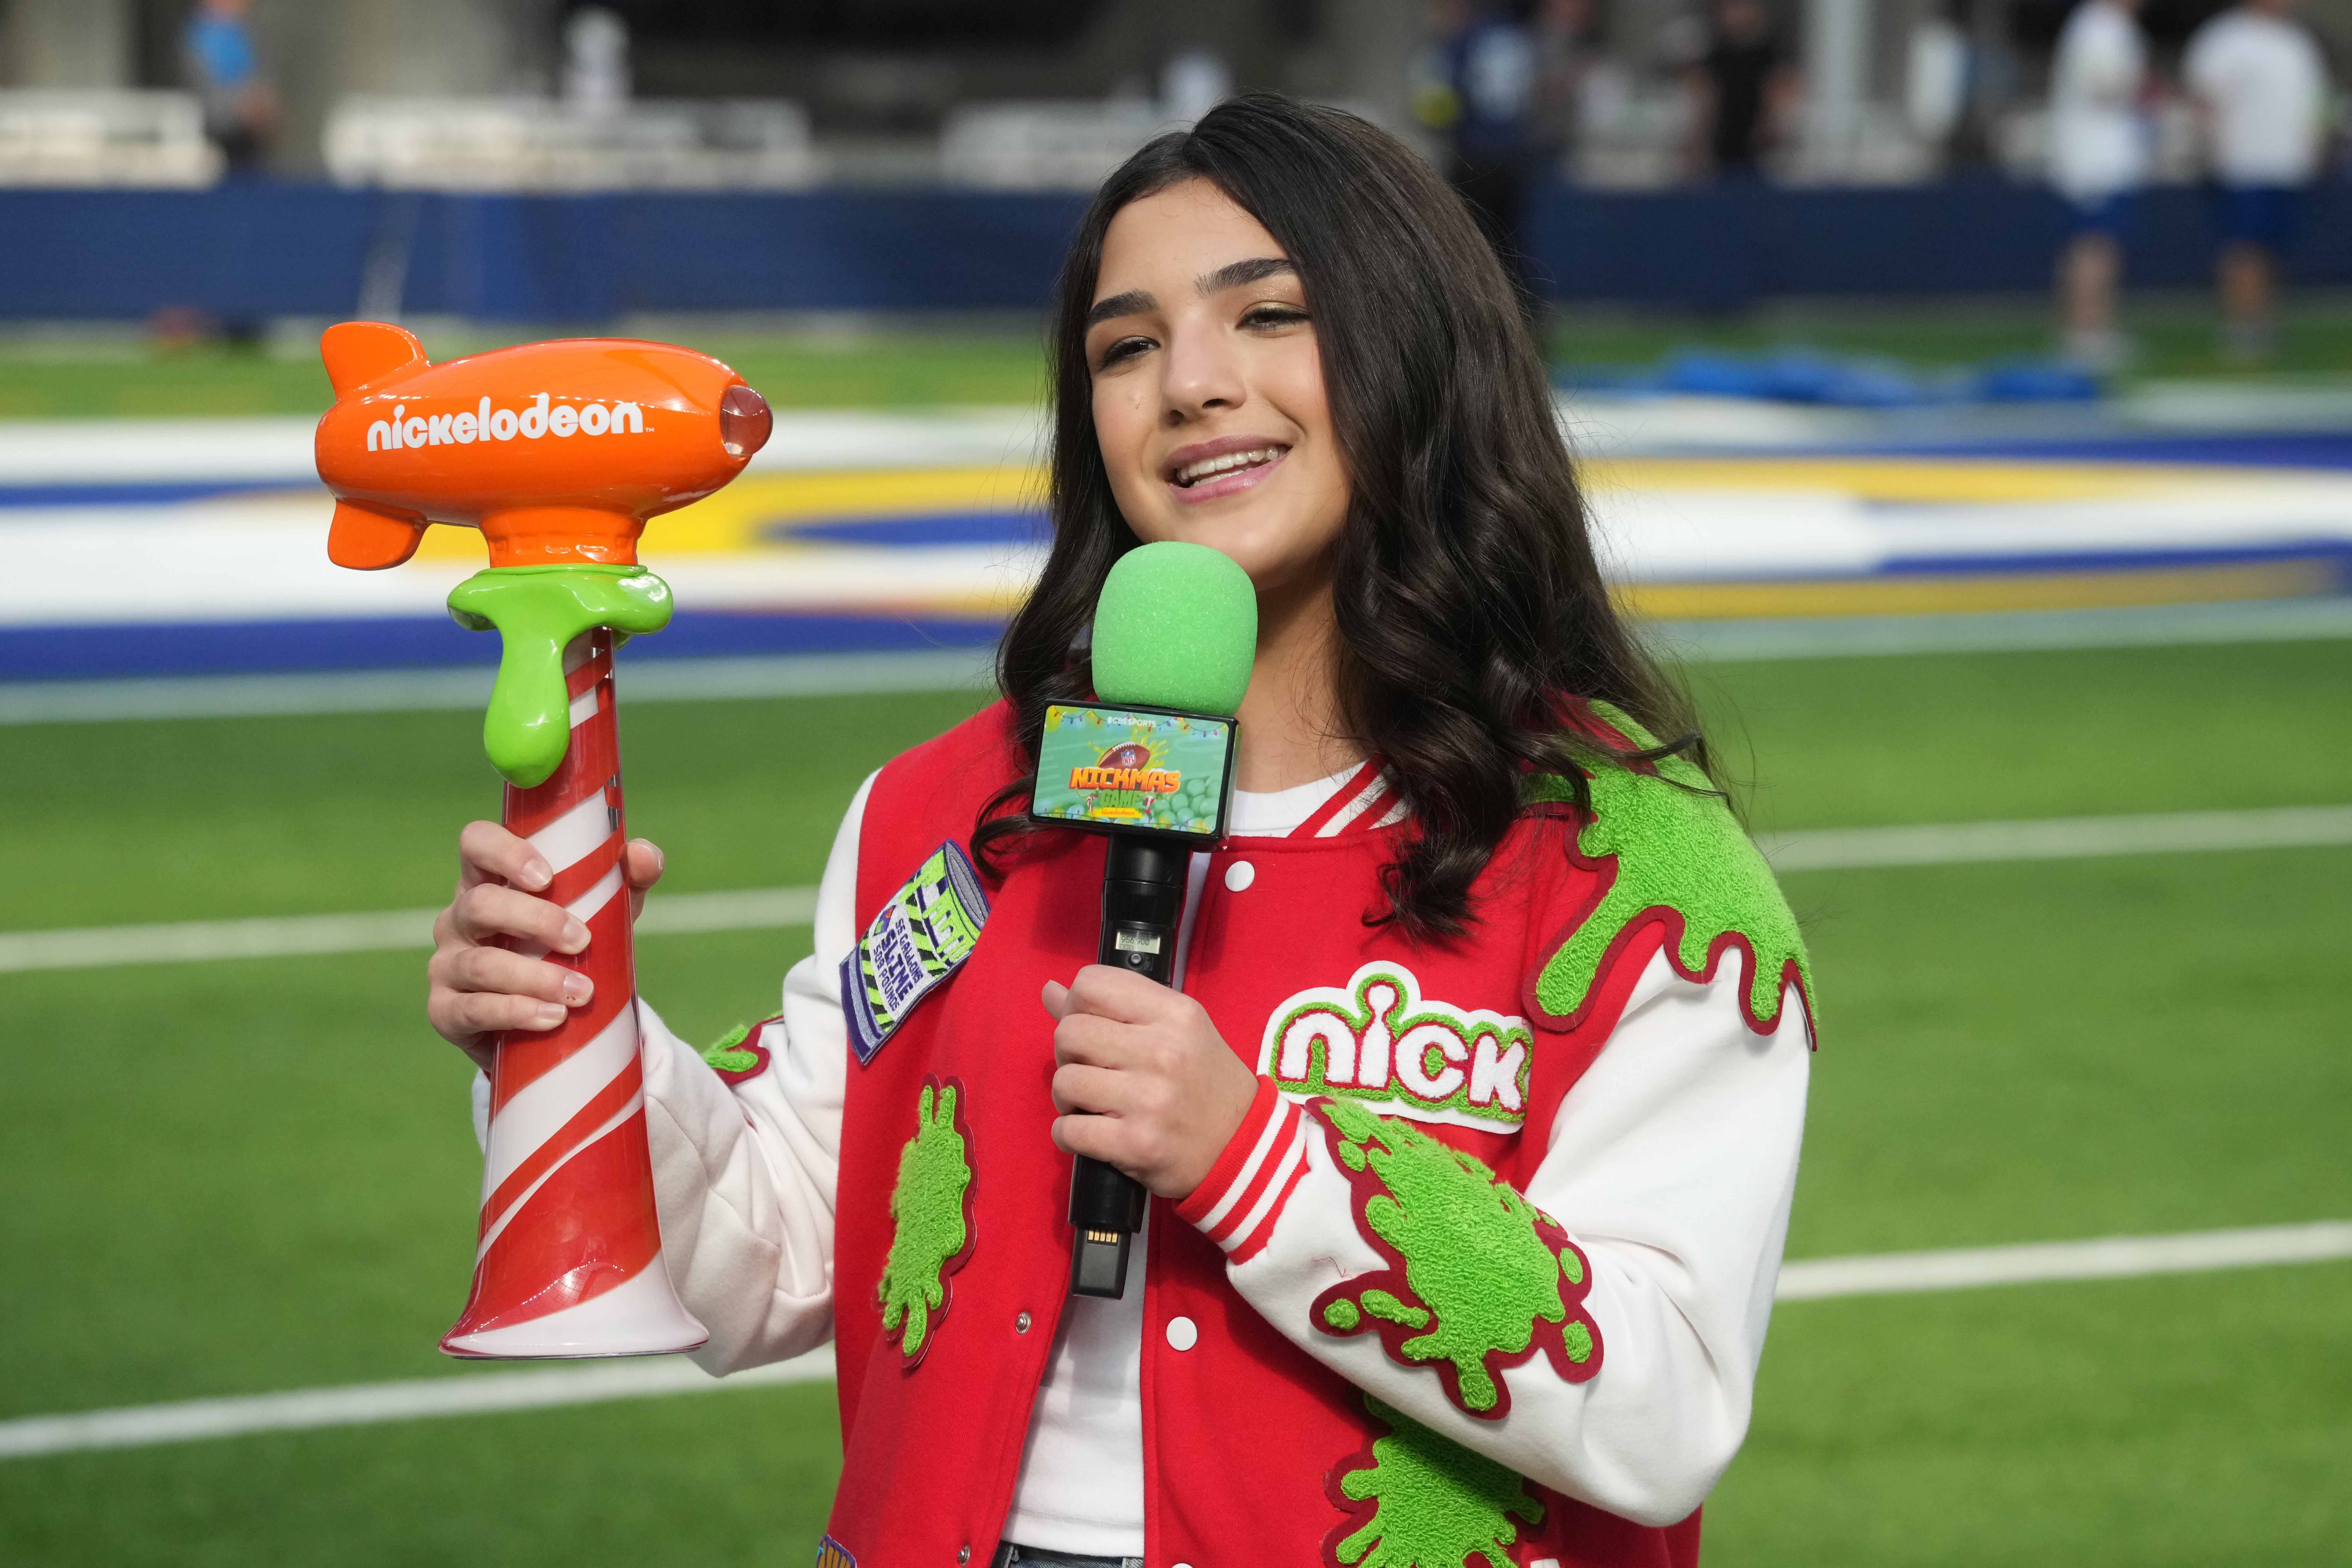 NFL Returns to Nickelodeon With Alternate Super Bowl Telecast